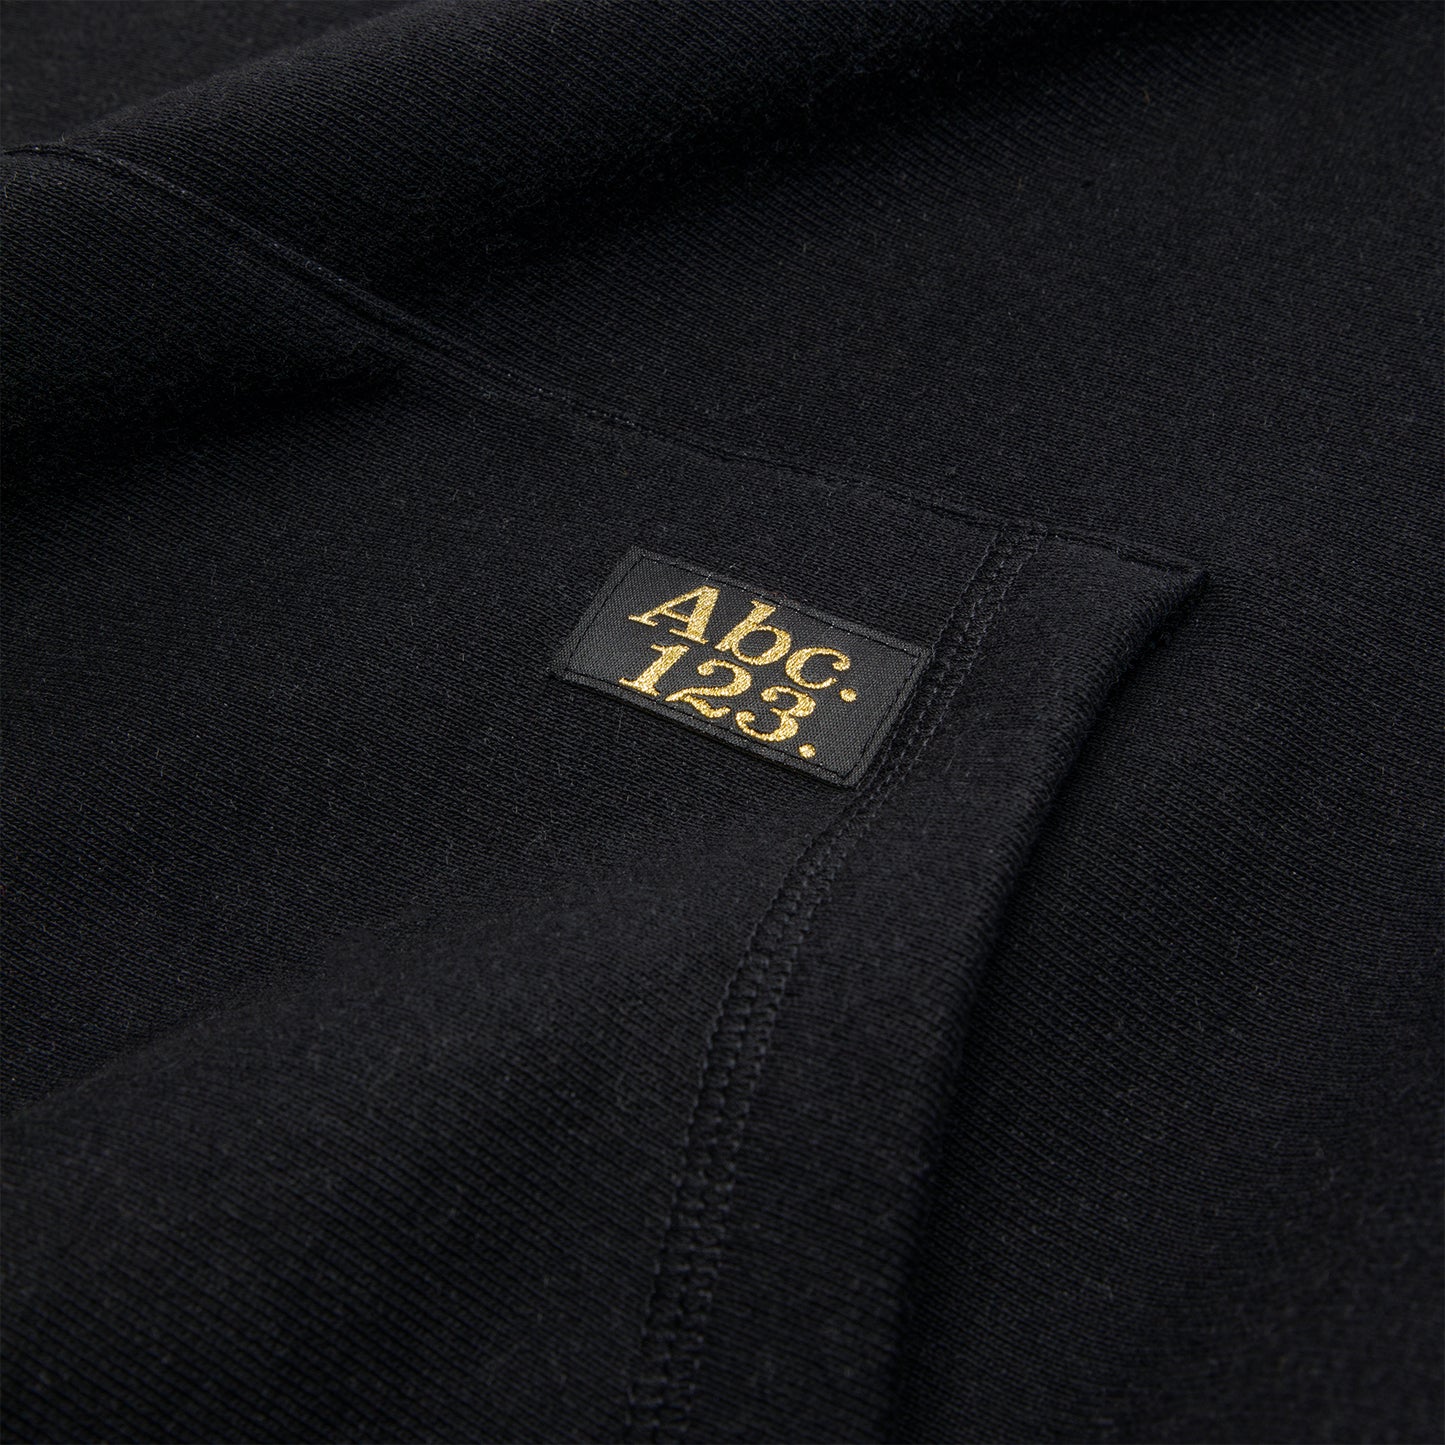 Advisory Board Crystals Abc. 123. Pullover Hoodie (Anthracite Black)